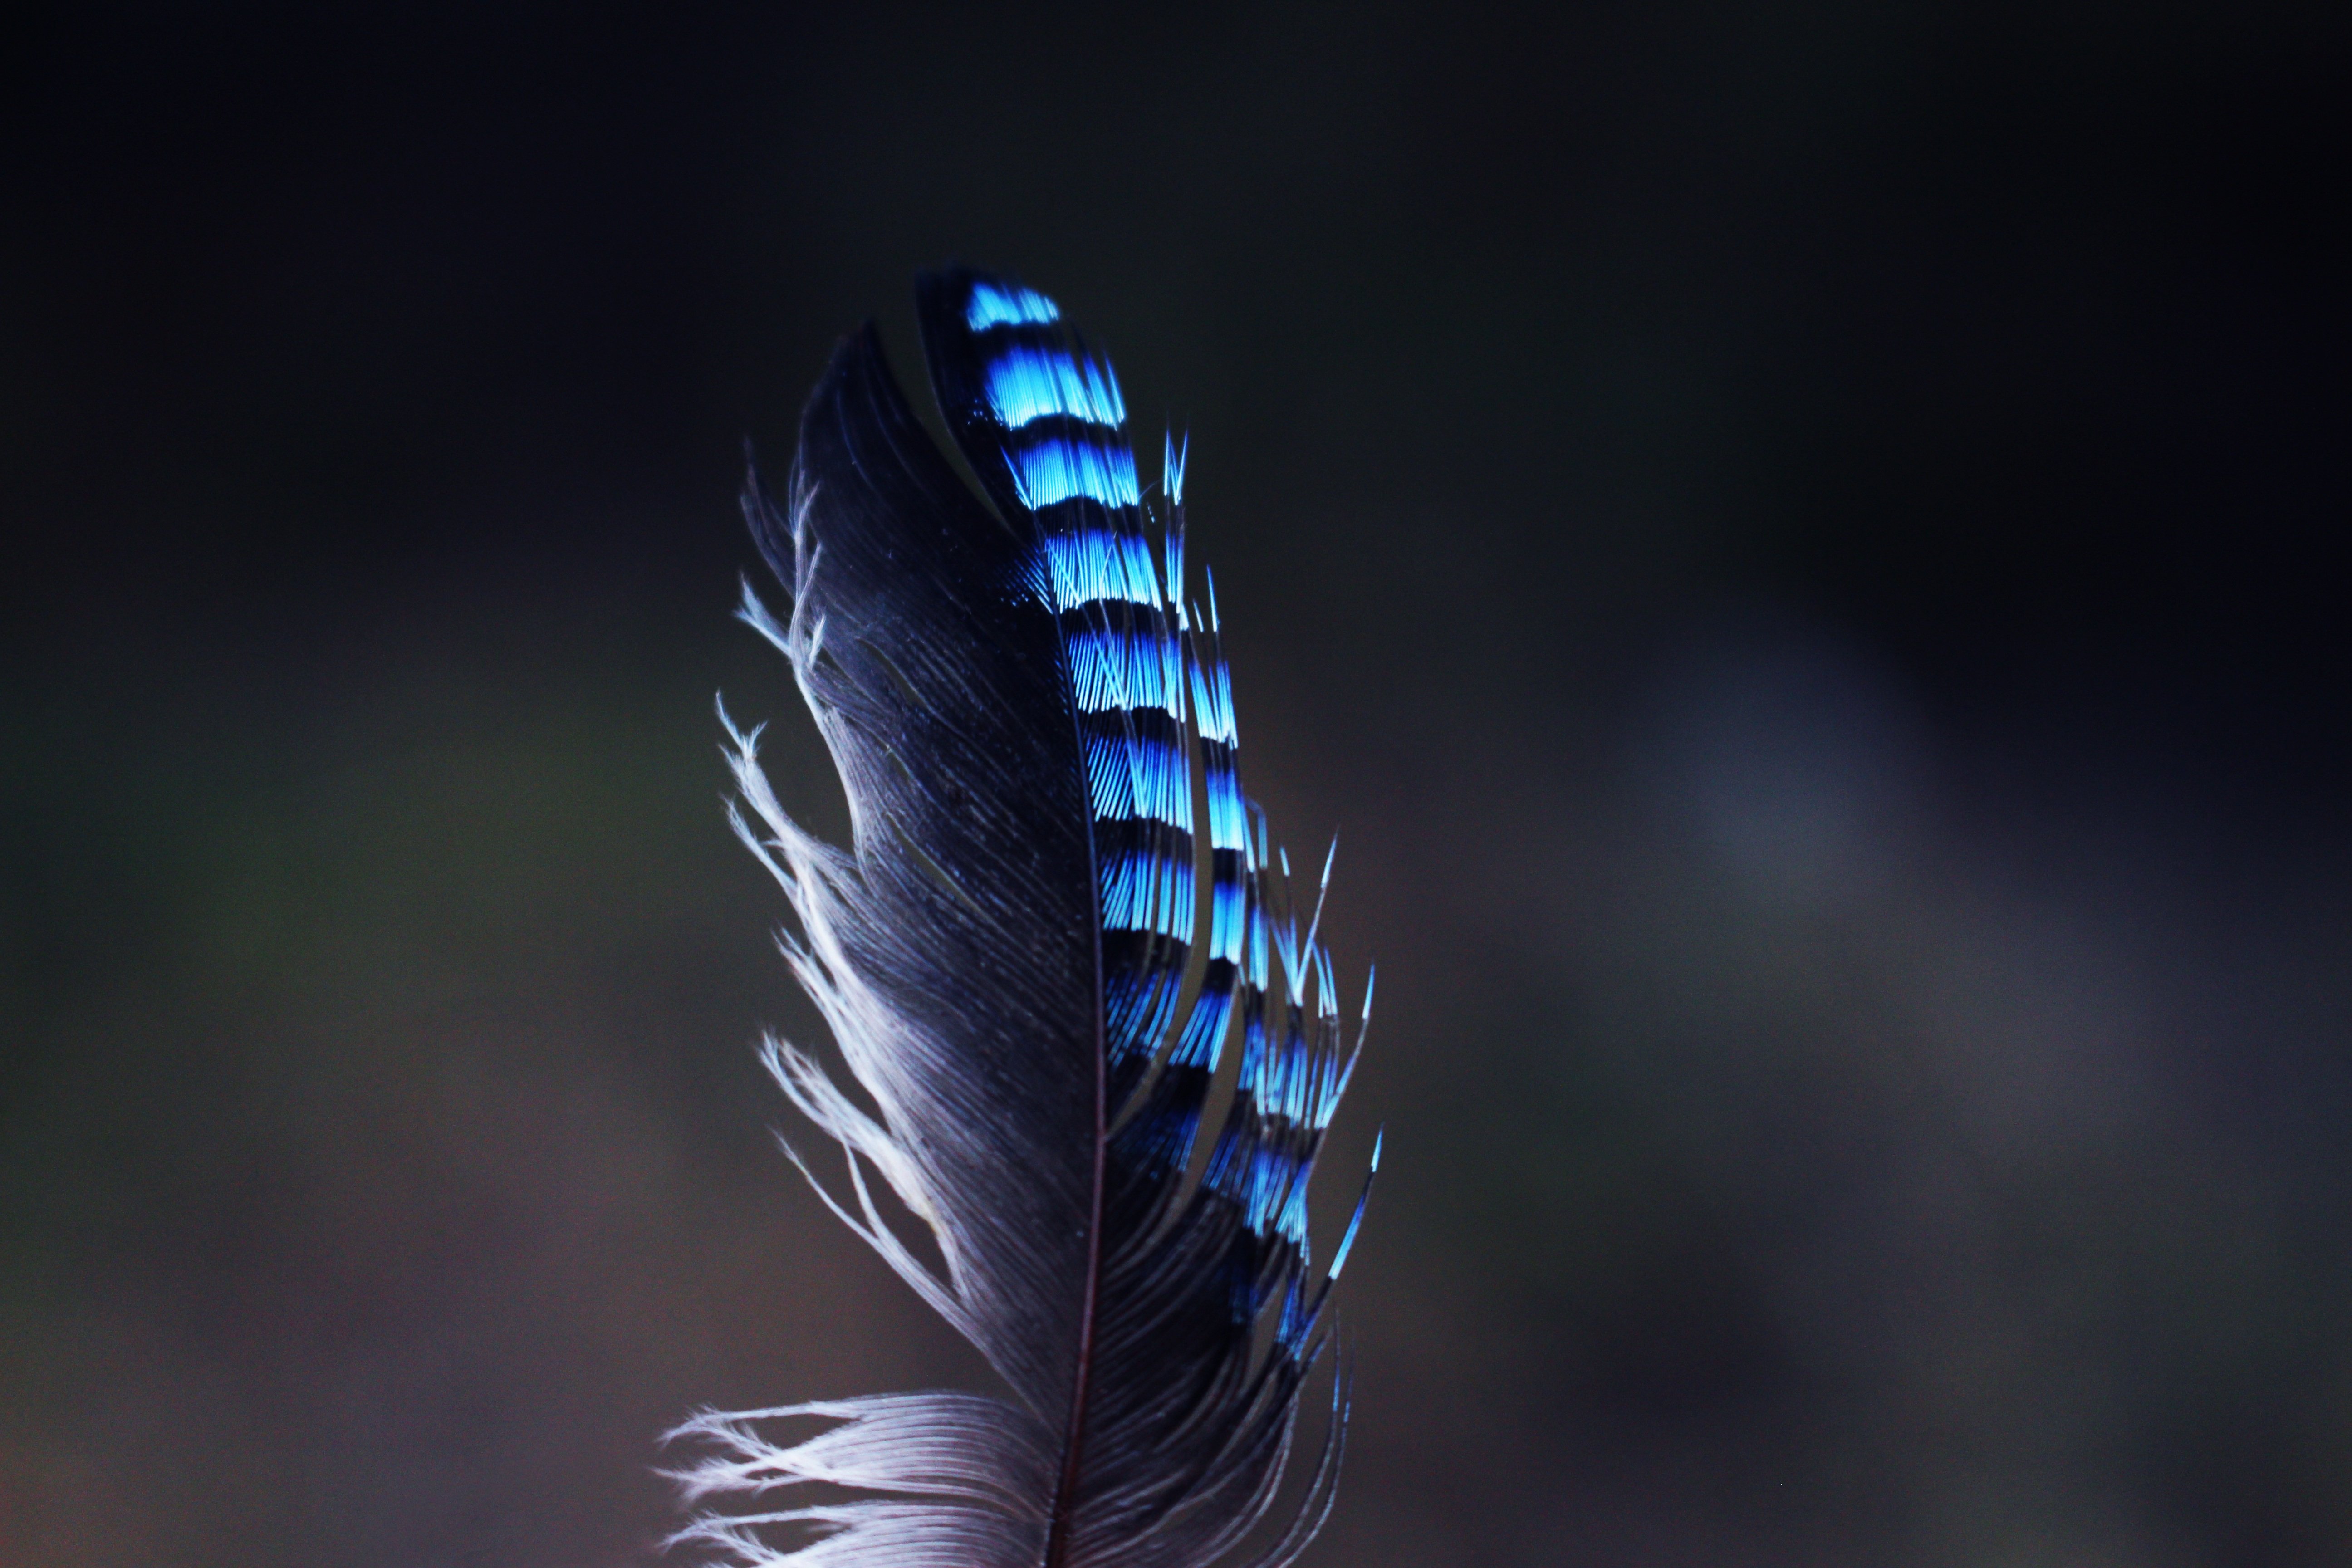 Free Image, nature, bird, wing, light, pen, reflection, darkness, blue, material, plumage, close up, birds, feathers, wings, beautiful, macro photography, jay feather, atmosphere of earth, computer wallpaper 5184x3456